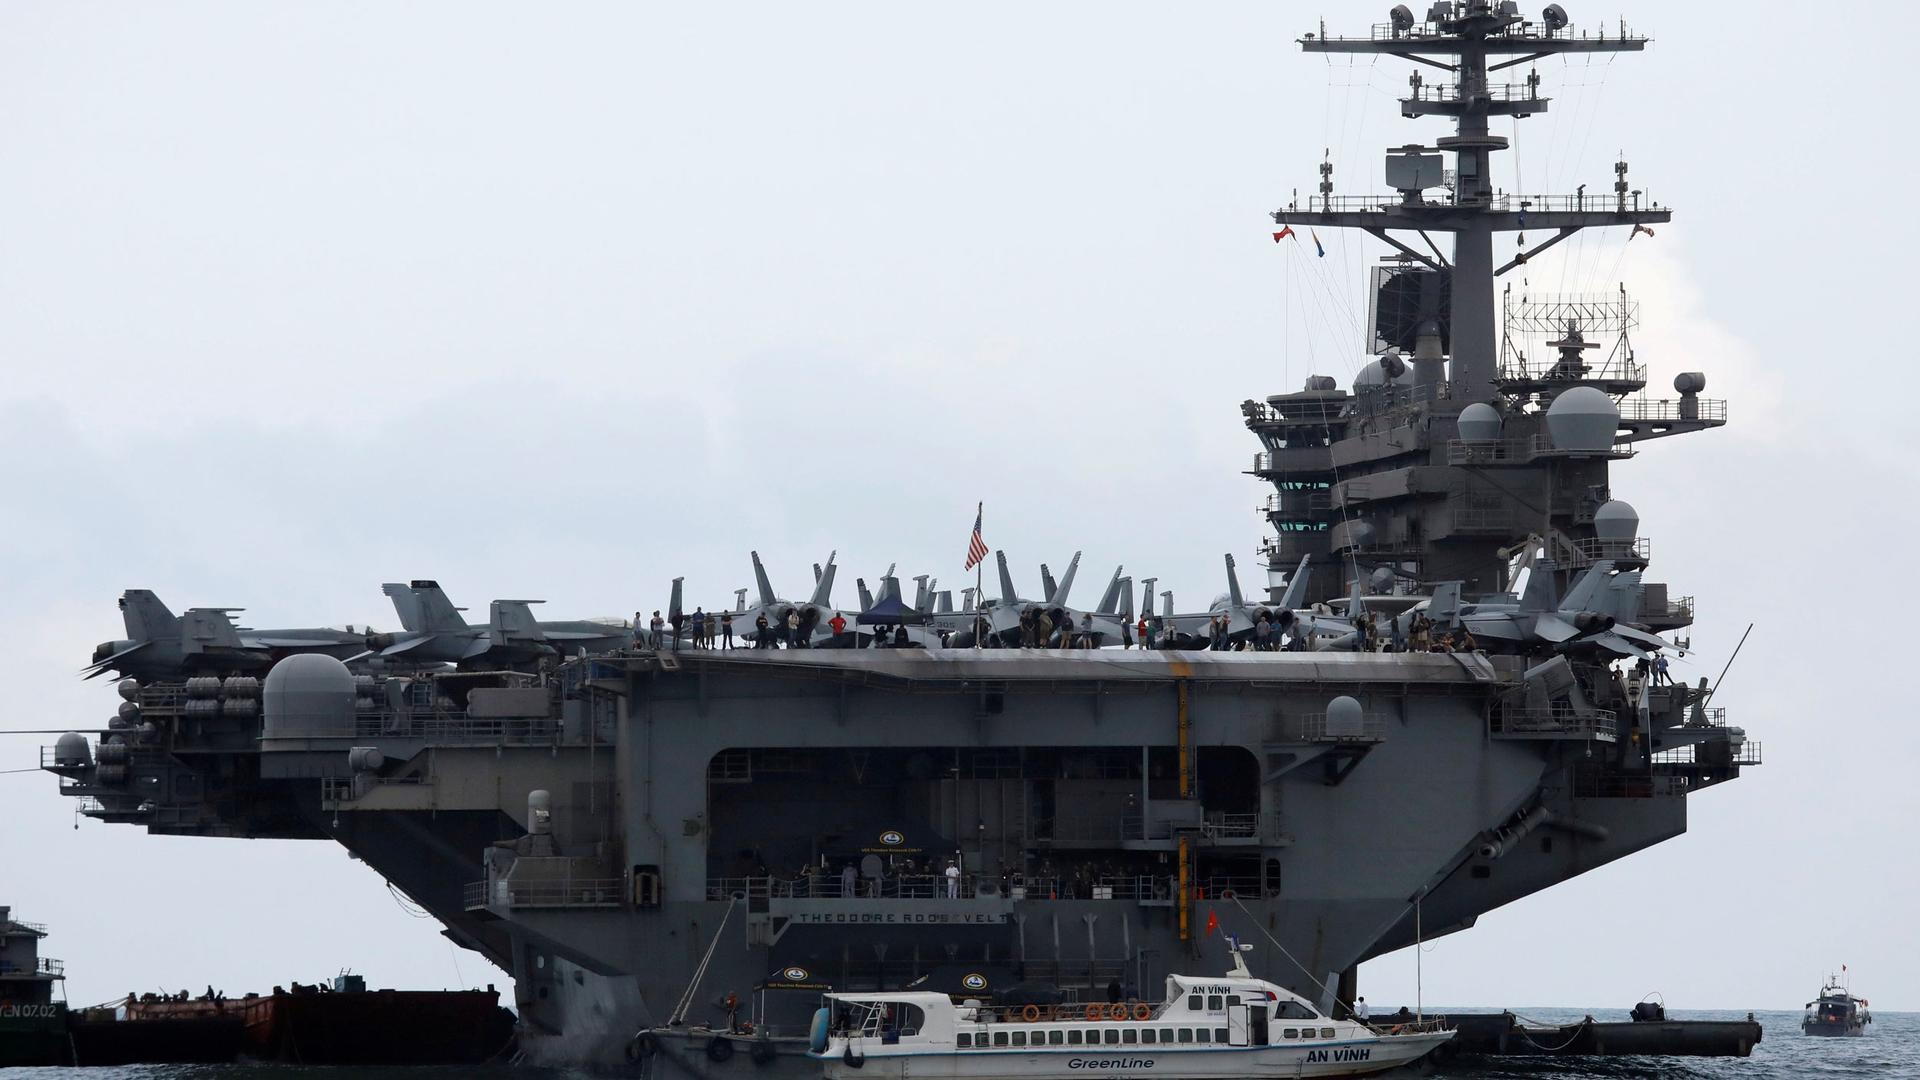 The USS Theodore Roosevelt aircraft carrier is shown from one end with several airplanes parked on the deck.